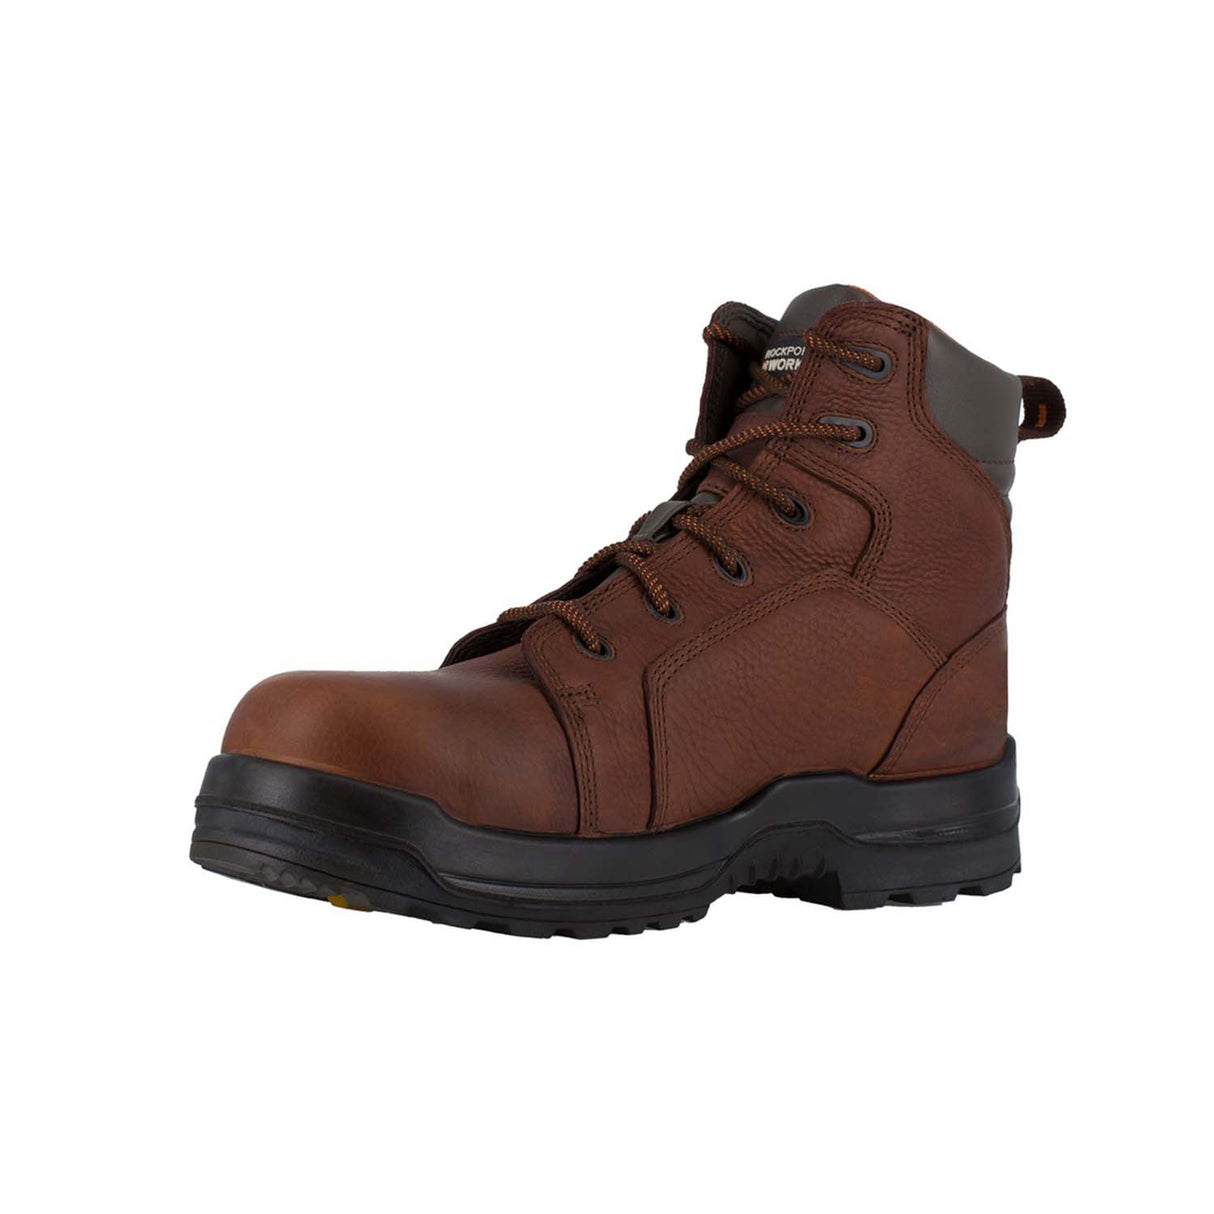 Rockport Work More Energy Comp-Toe Boots RK664-4